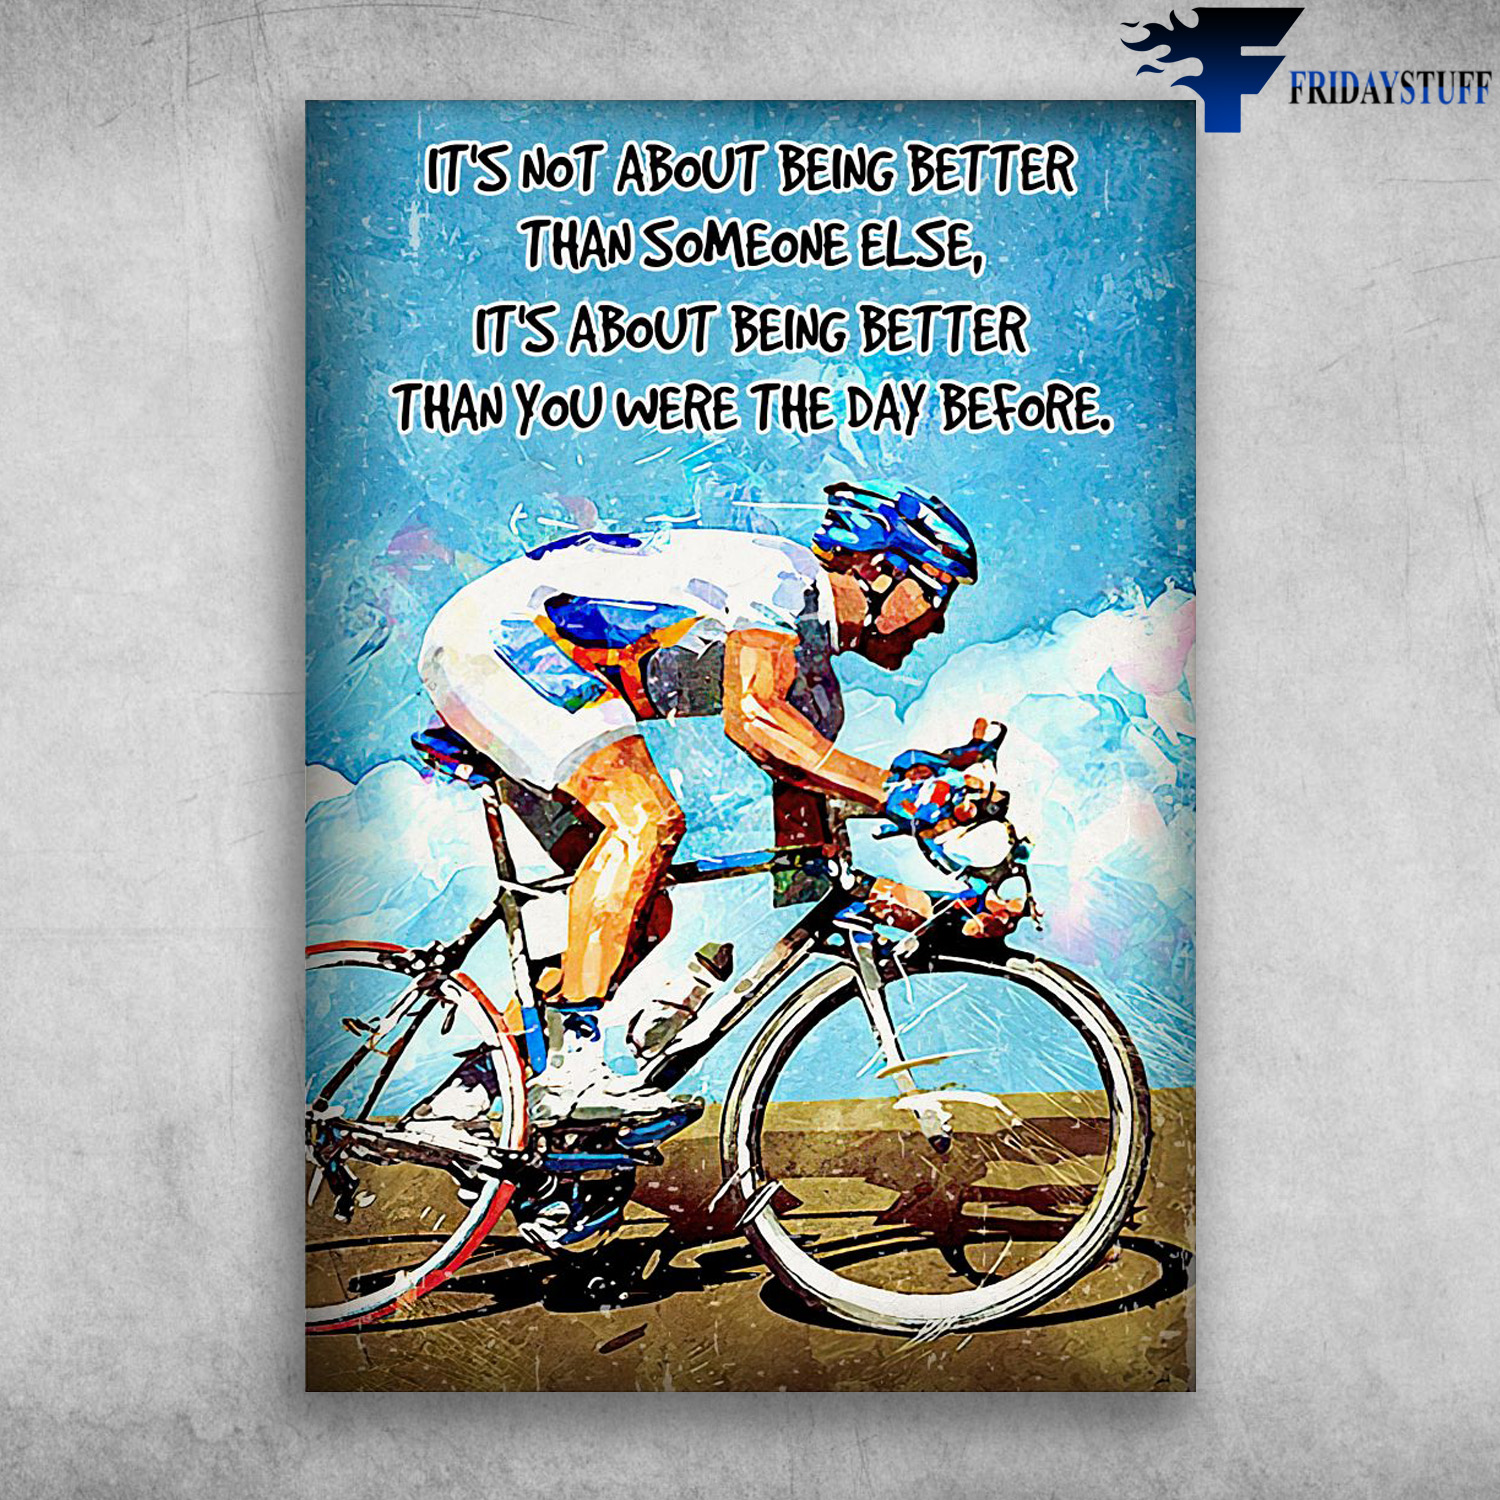 Cycling Man, Biker - It's Not About Being Better Than Someone Else, It's About Being Better Than You Were The Day Before